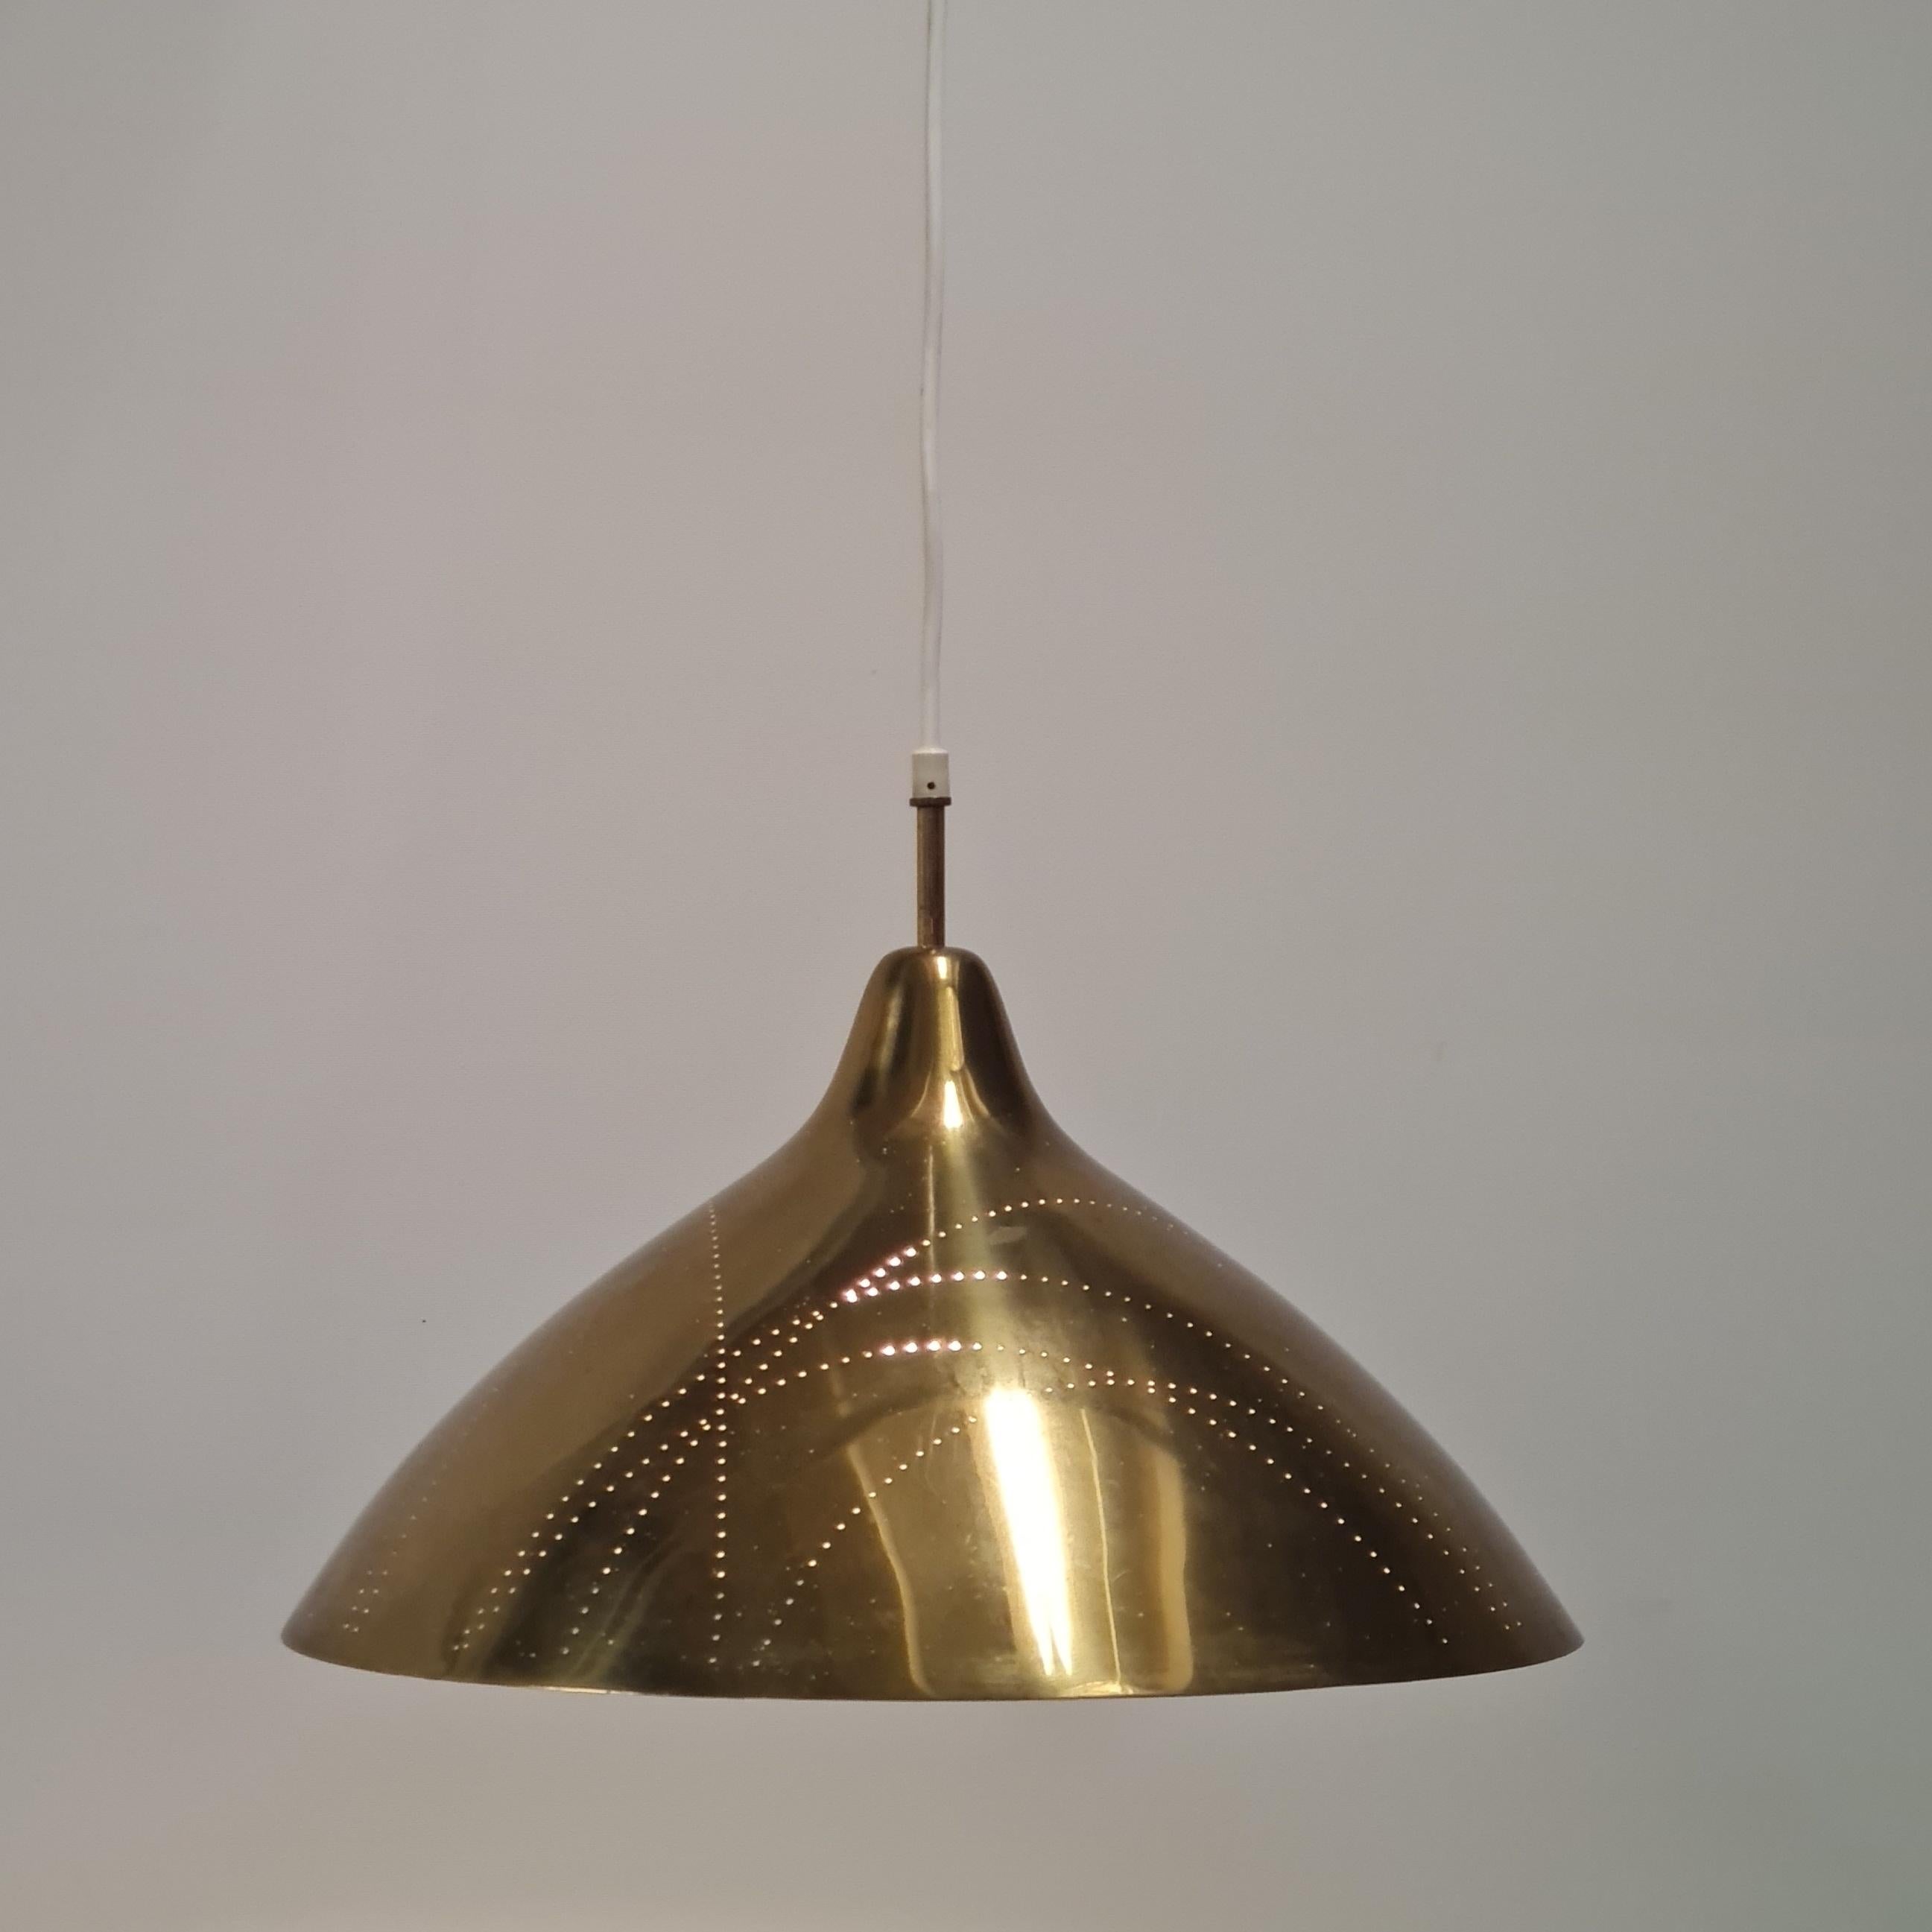 A very beautiful ceiling lamp designed by the genius Lisa Johansson-Pape, and manufactured by Orno in the 1950s. This lamp is in full brass with a perforated shade full of tiny dots that form a lovely design across the lamp. When the lights are